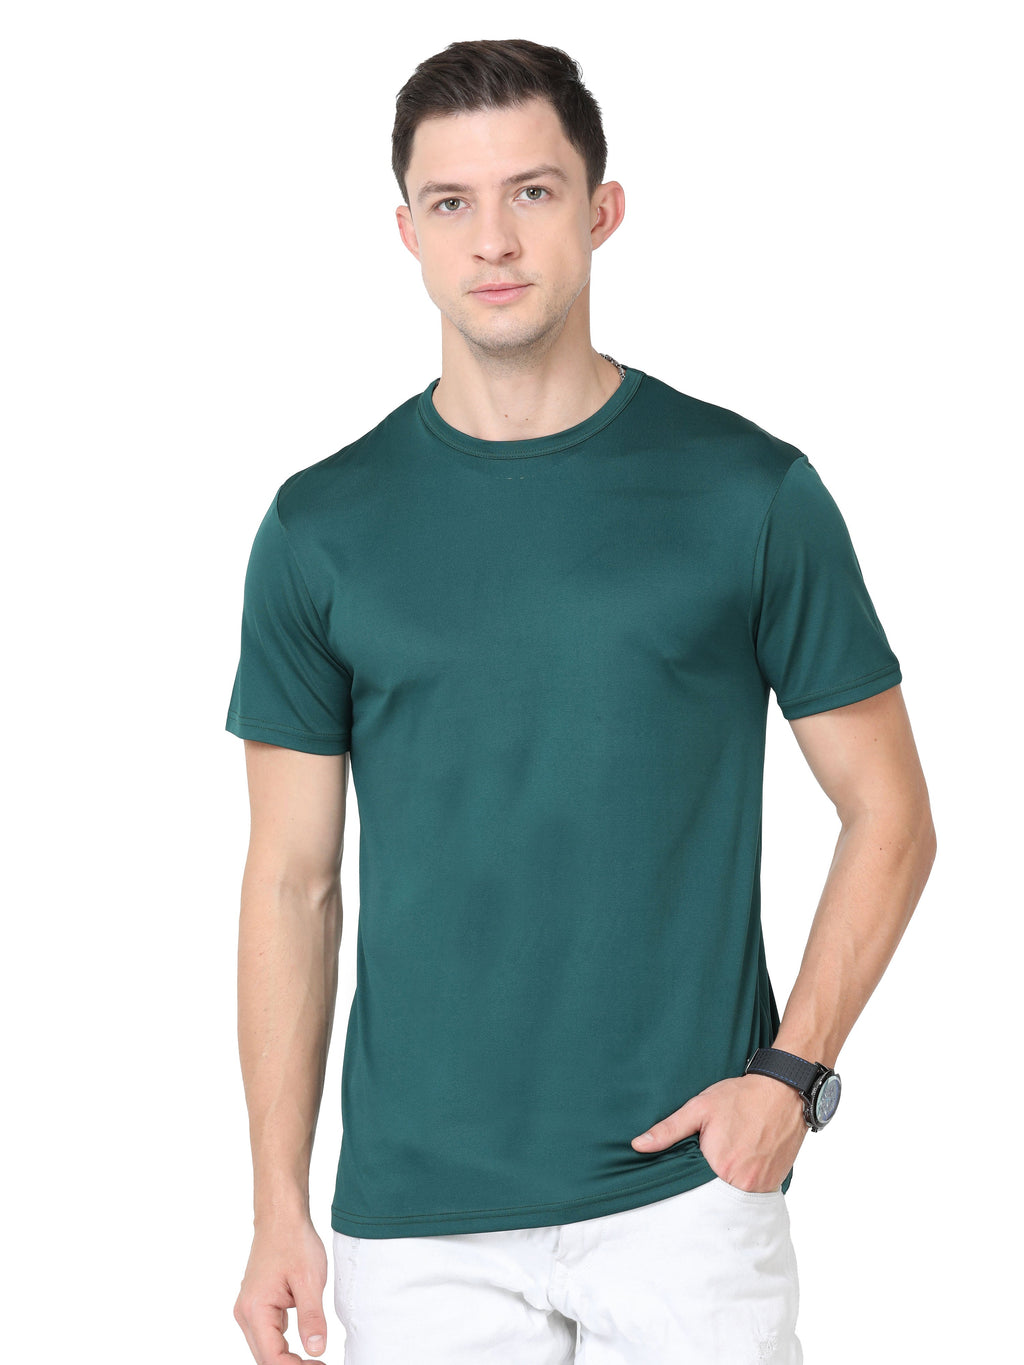 Pick Your Own Choice - Men's rPET Round Neck TShirt Combo